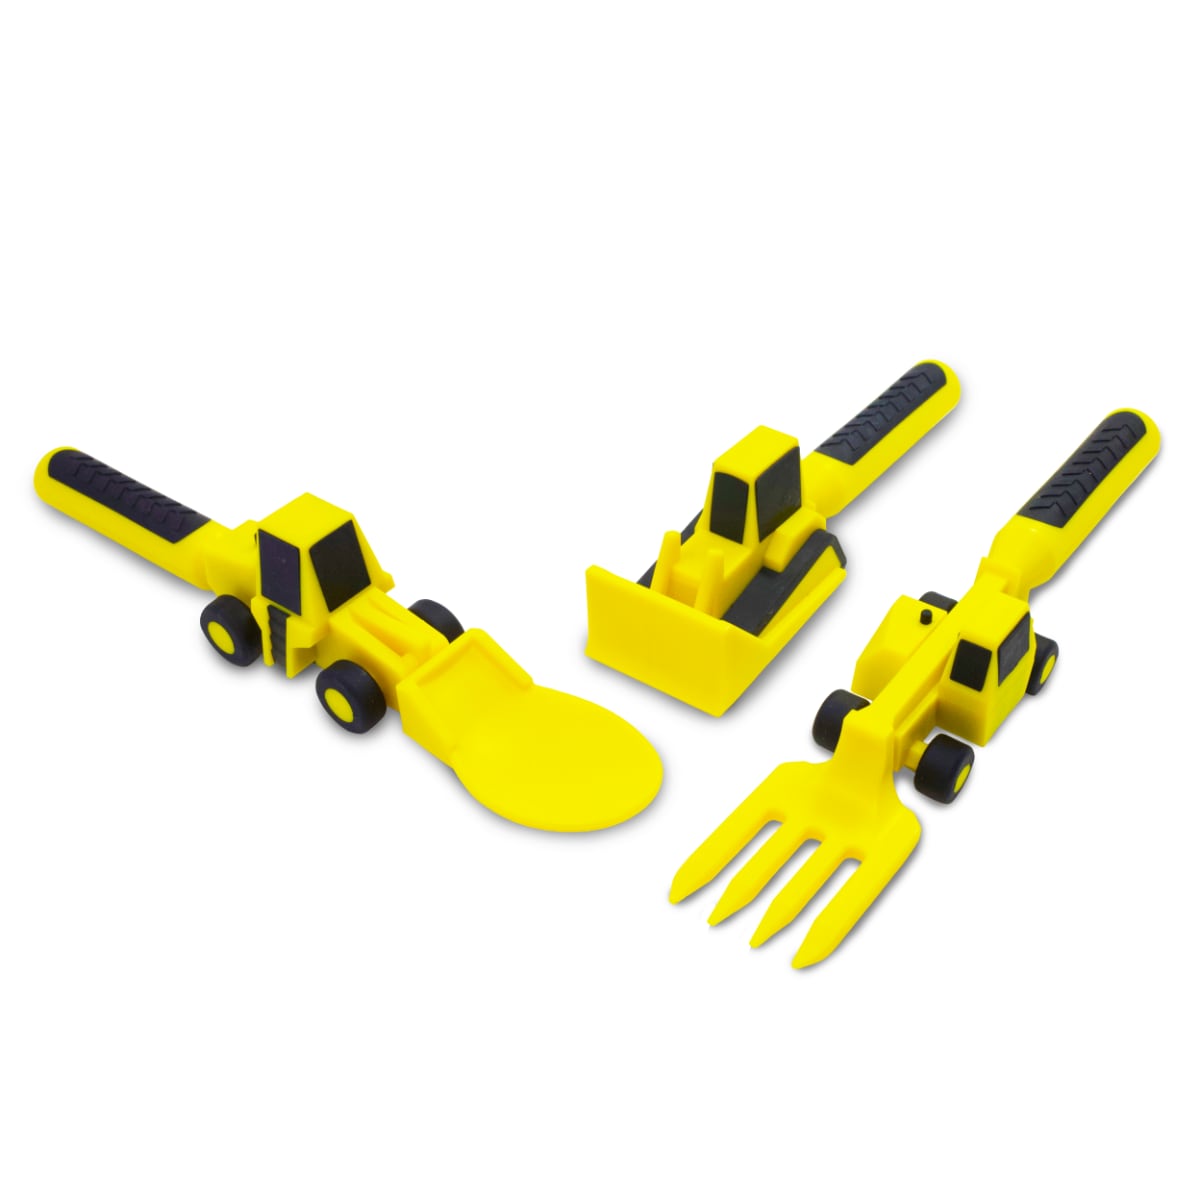 Set of 3 Construction Utensils-Fork, Spoon, & Pusher by Constructive Eating